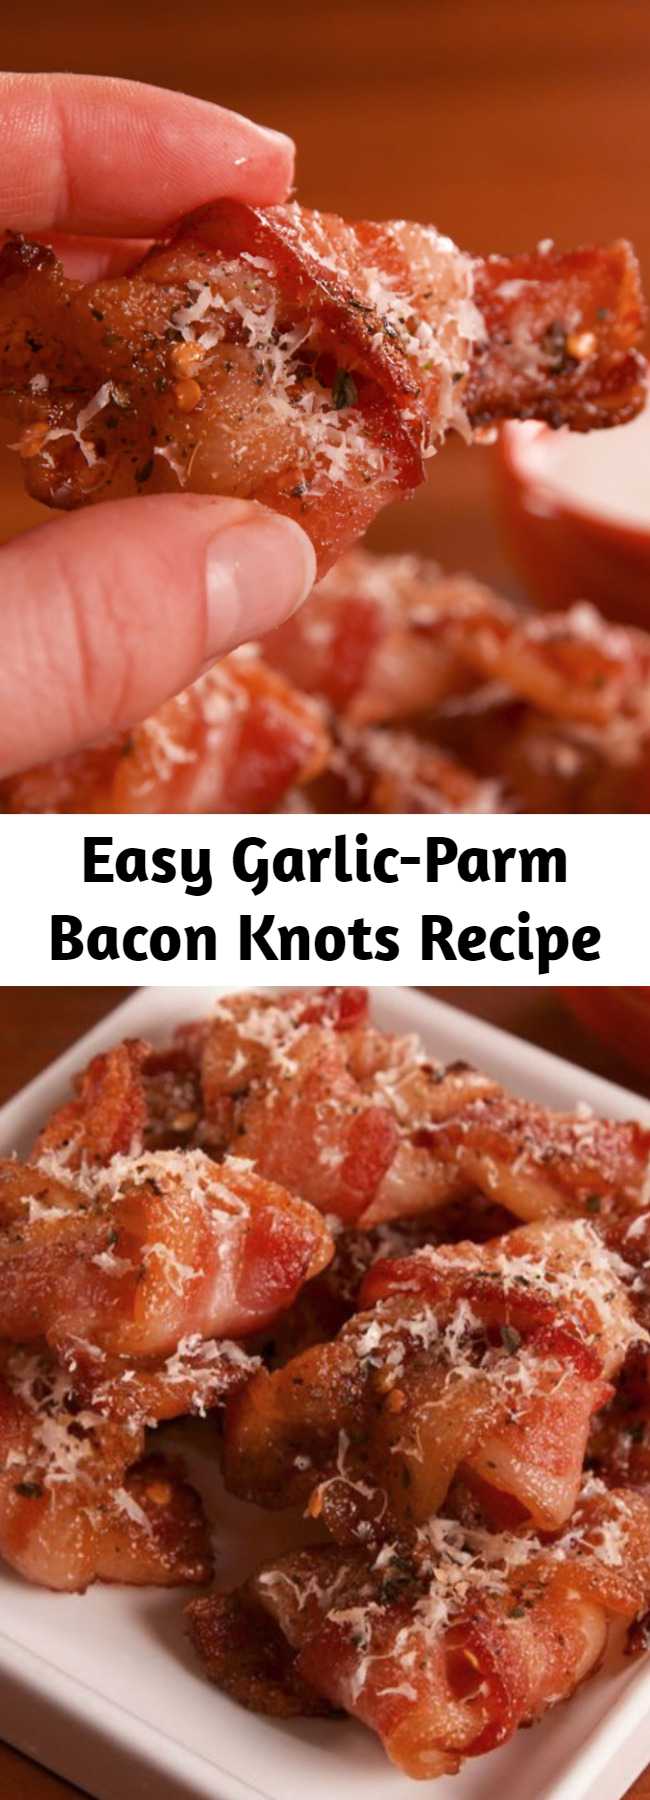 Easy Garlic-Parm Bacon Knots Recipe - If you love garlic knots but HATE carbs, you need Garlic Parm Bacon Knots in your life STAT. You're KNOT going to believe these. #garlic #parm #parmesan #bacon #baconknots #lowcarb #lowcarbsnacks